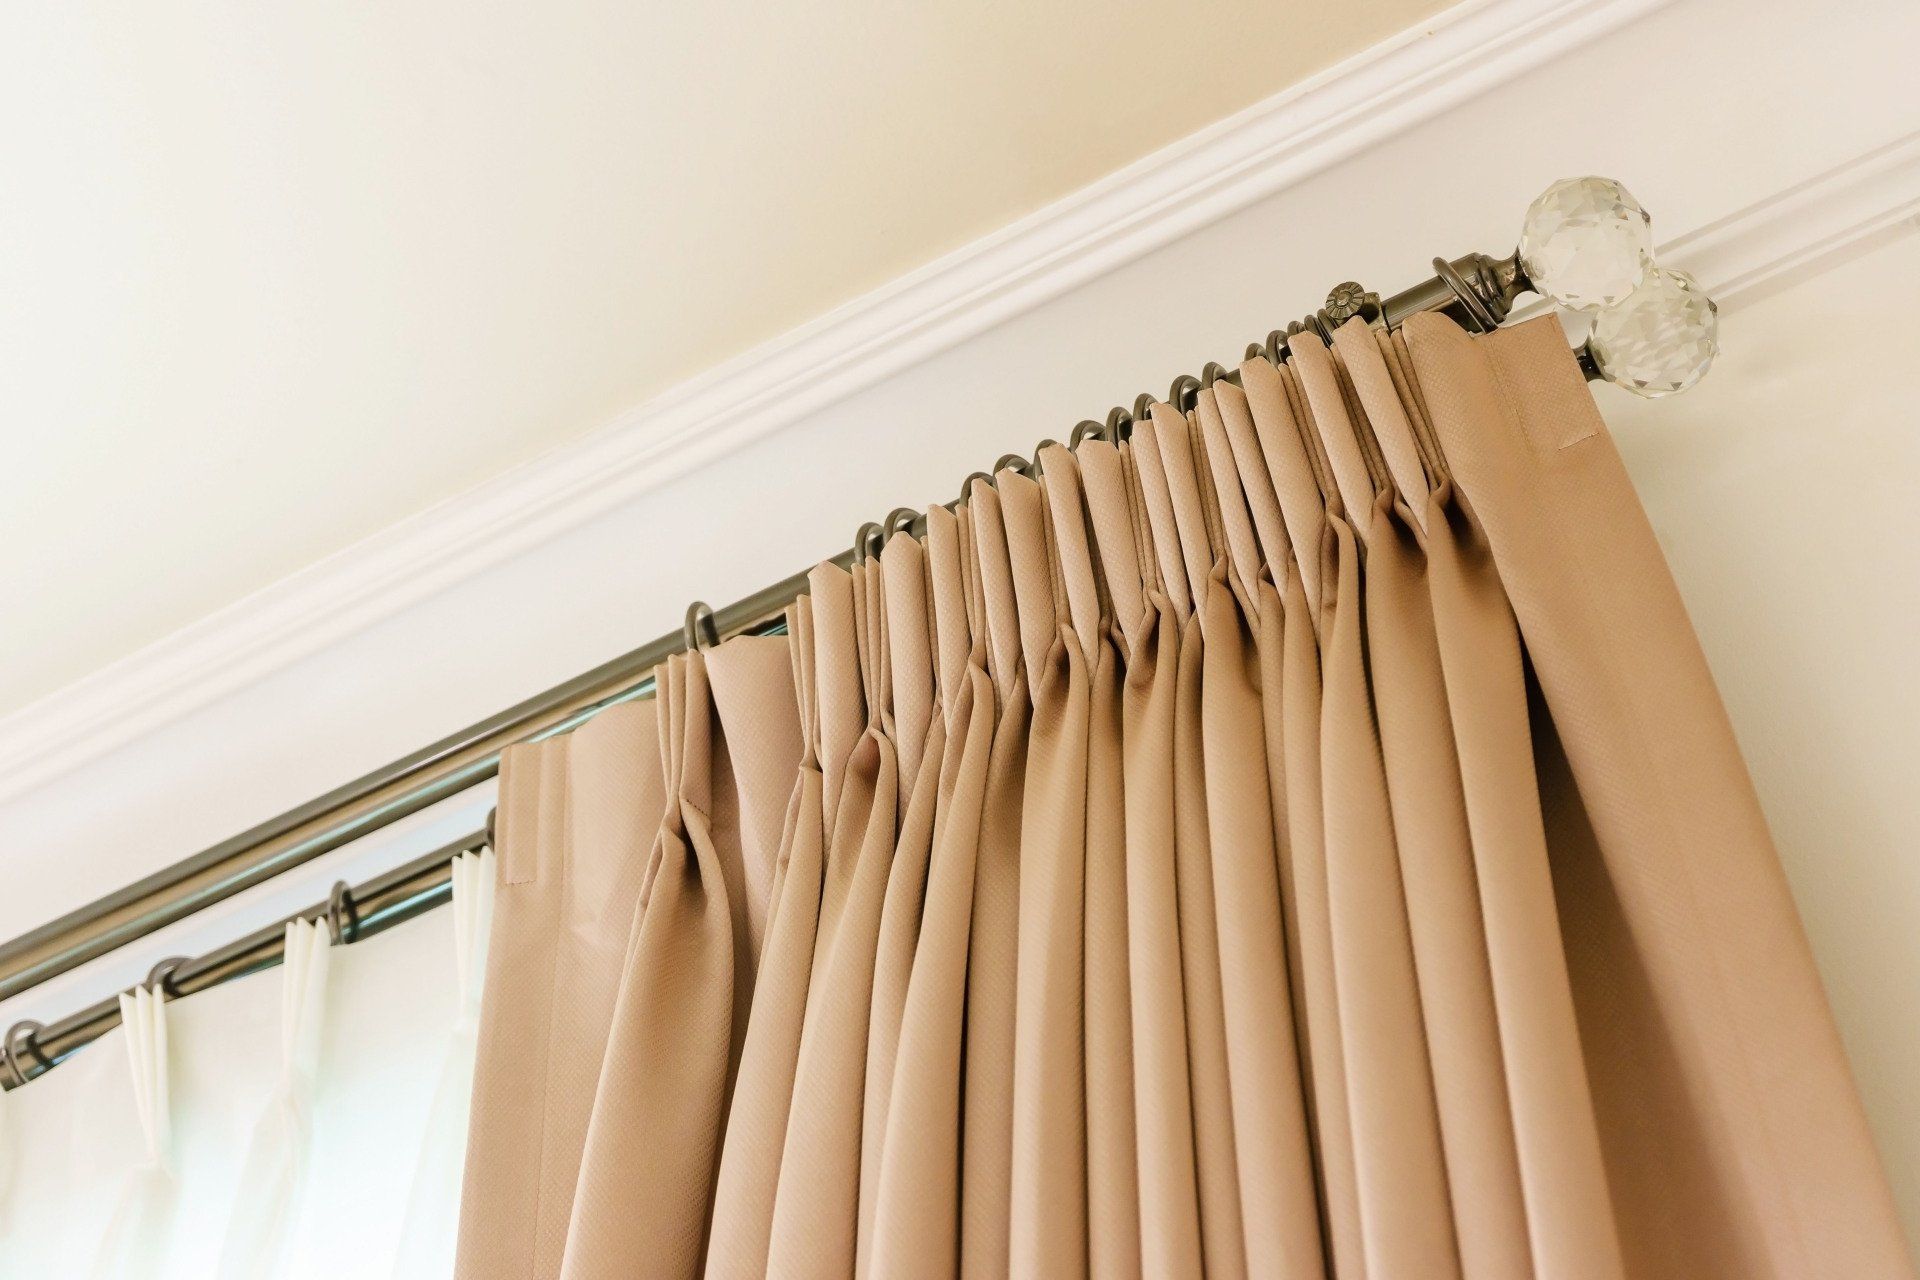 curtains and blinds